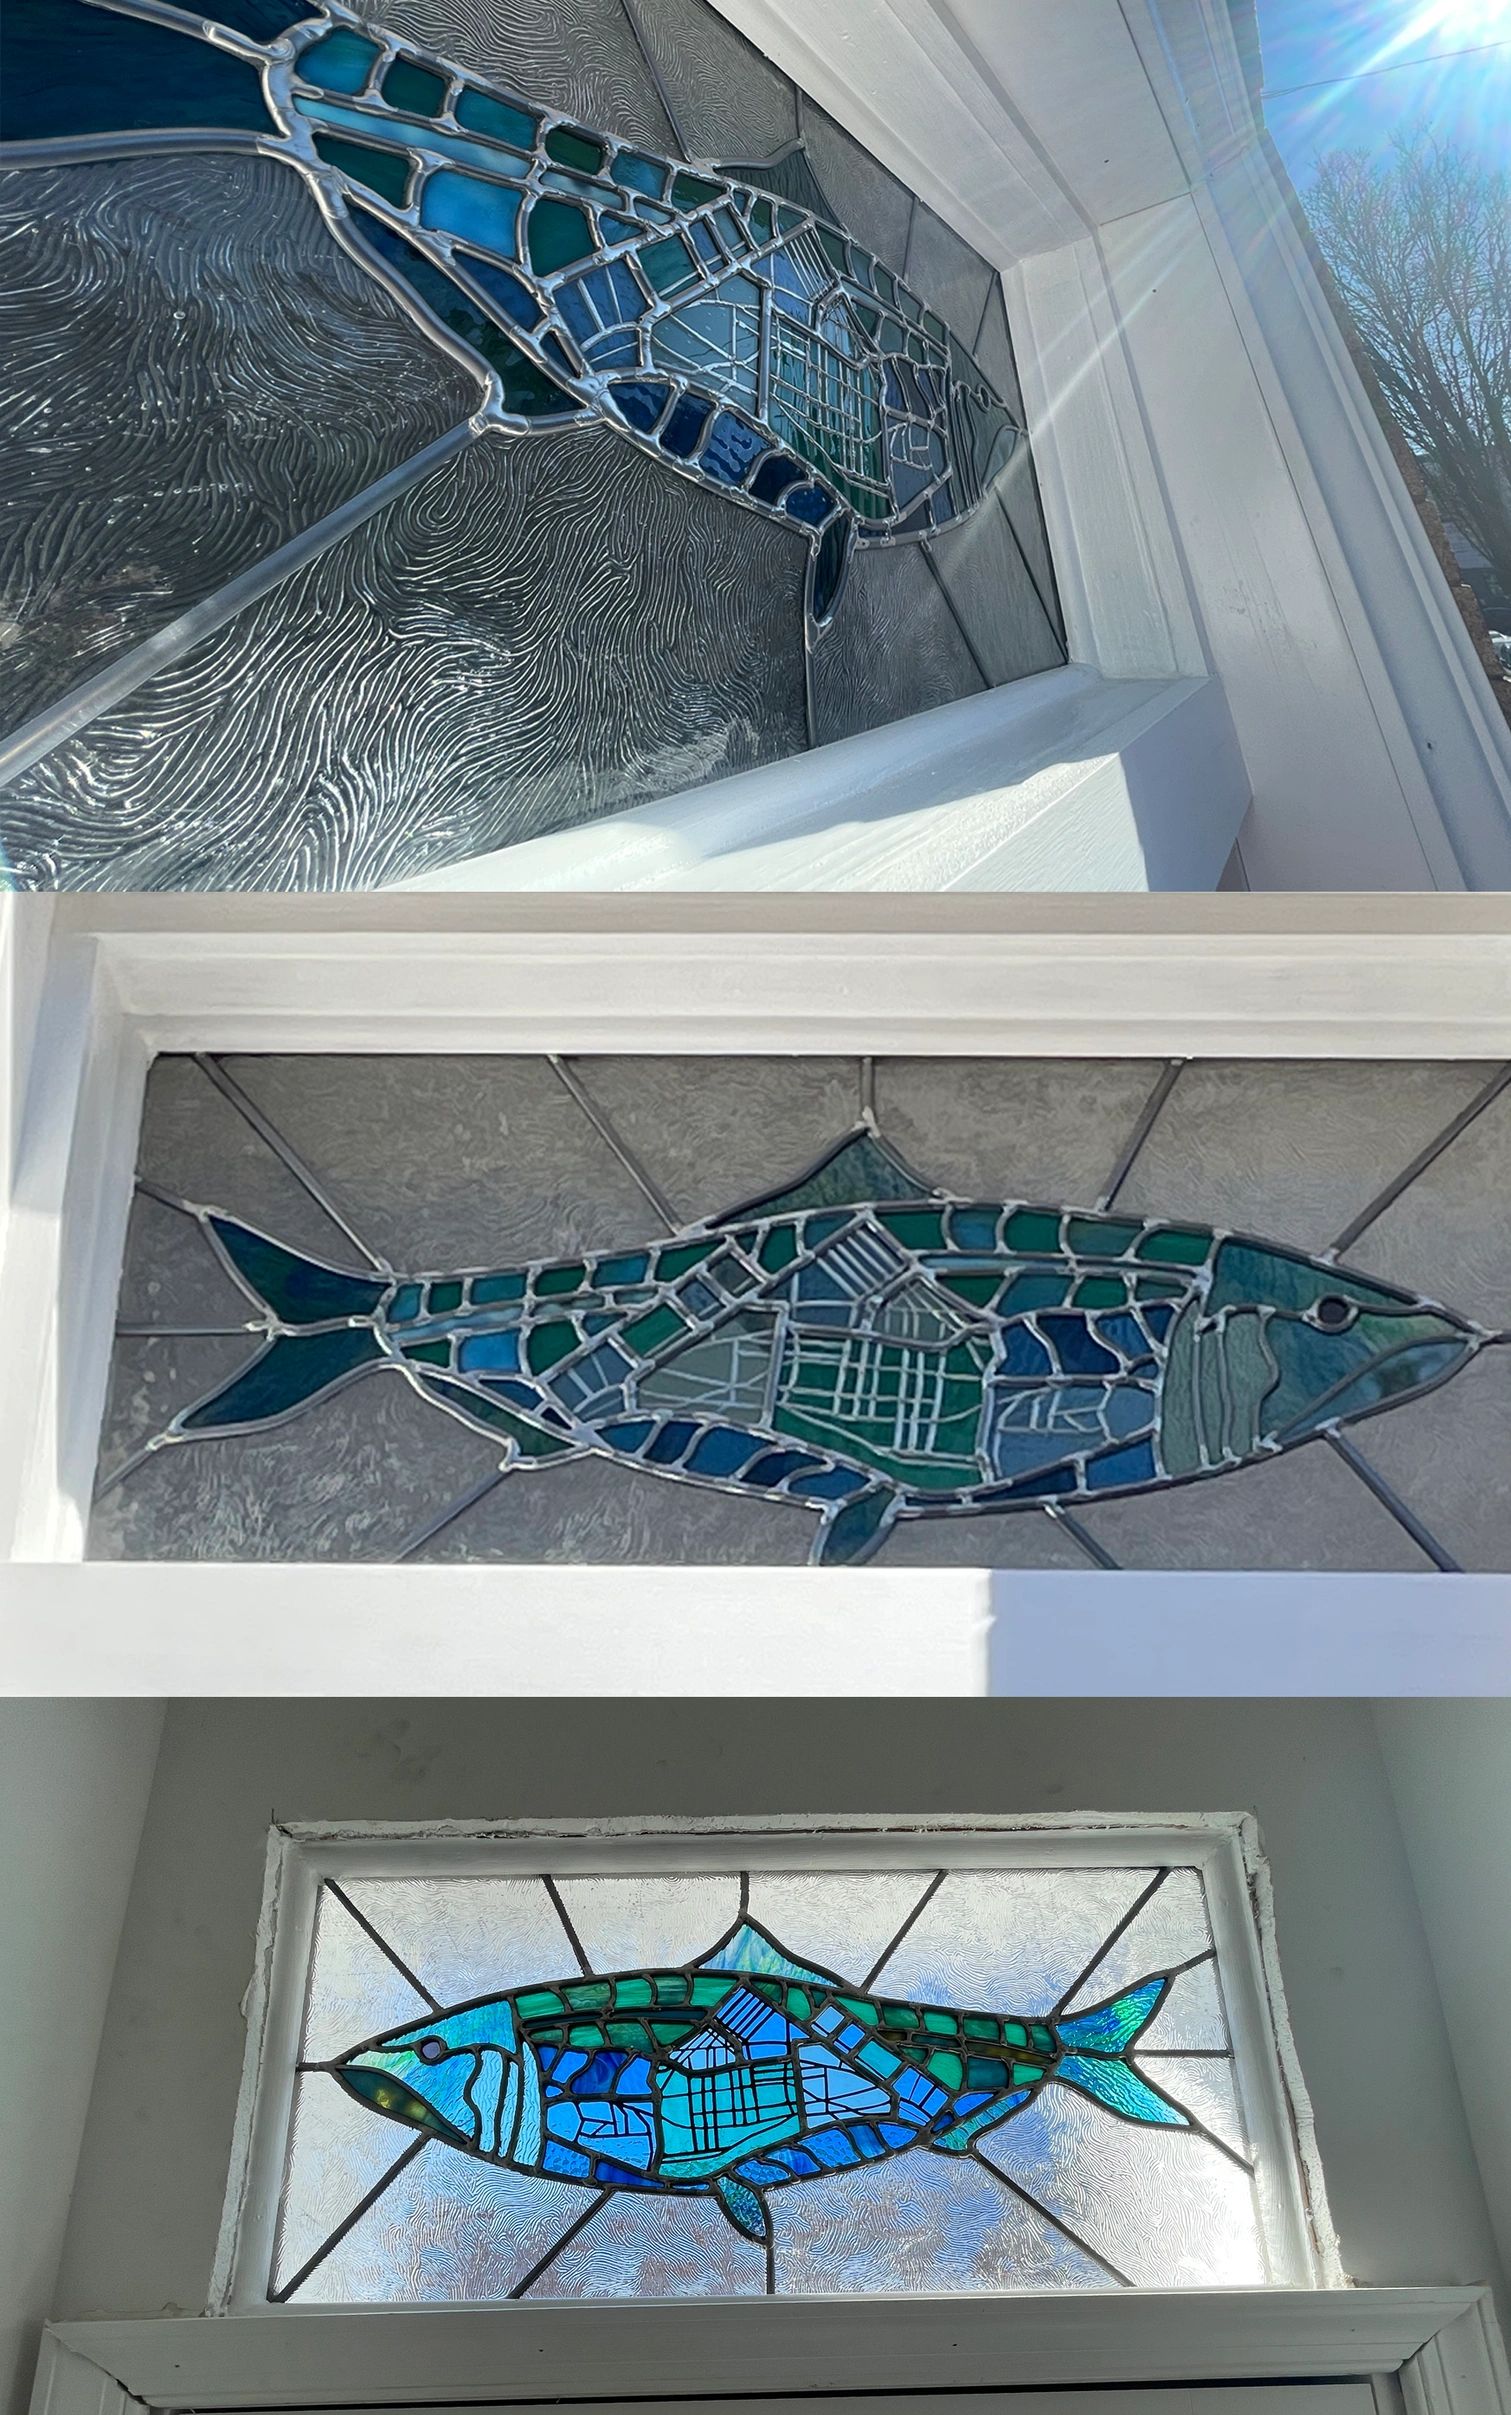 Stained glass transom of the Fishtown (Philly) Fish